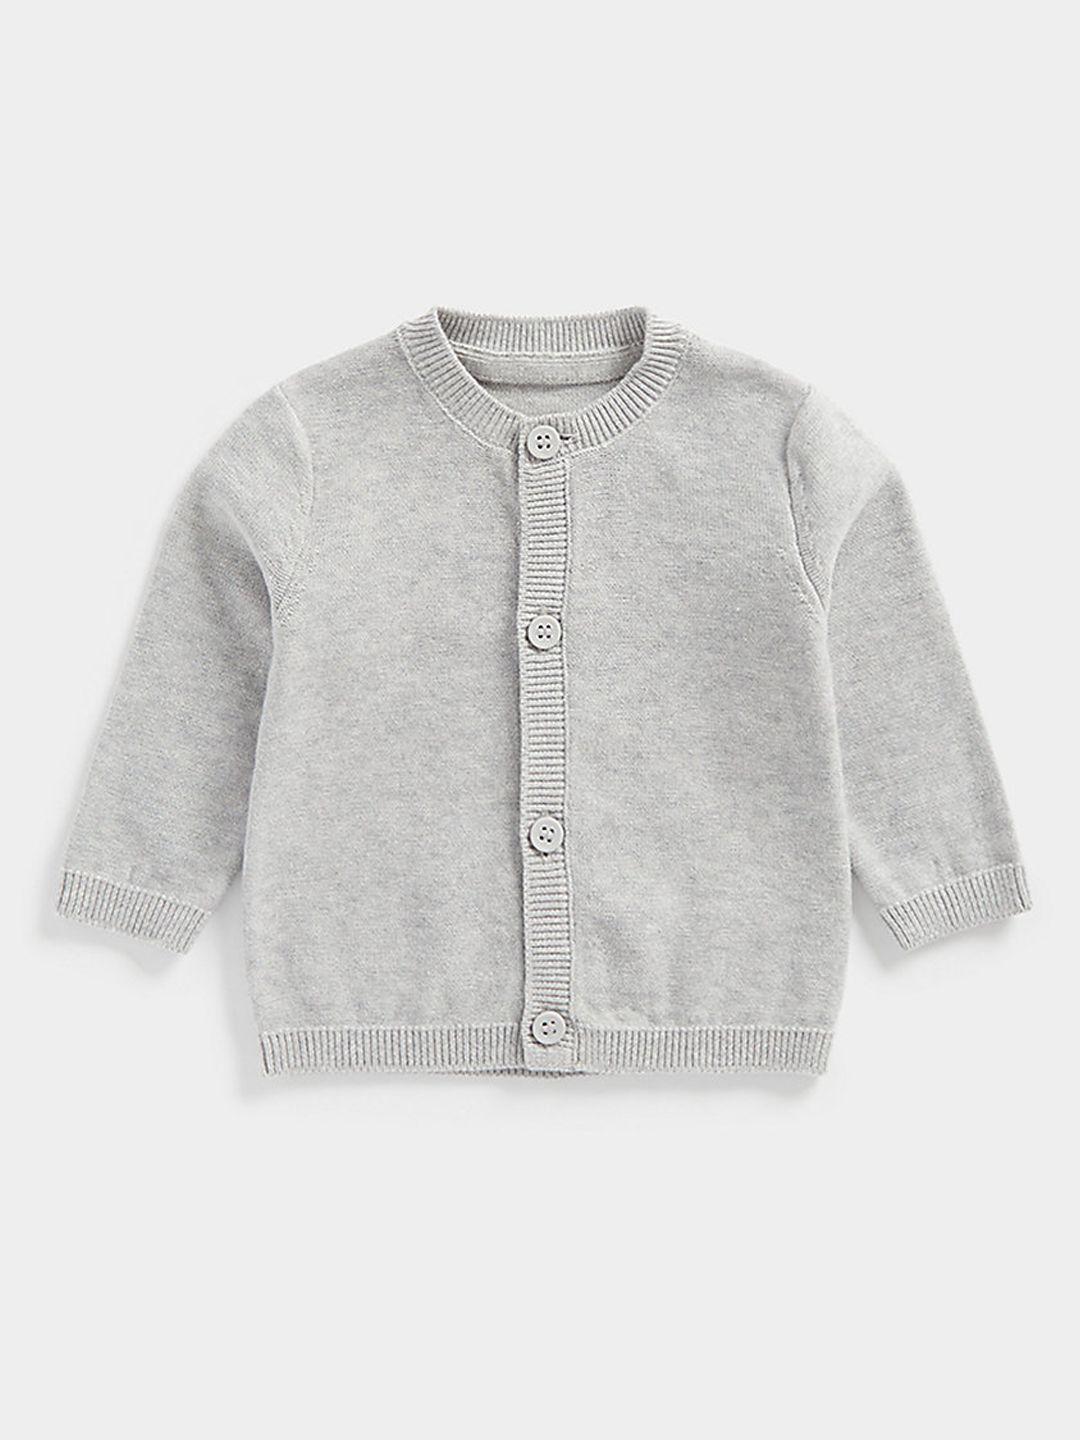 mothercare-boys-grey-melange-solid-organic-cotton-front-open-cardigan